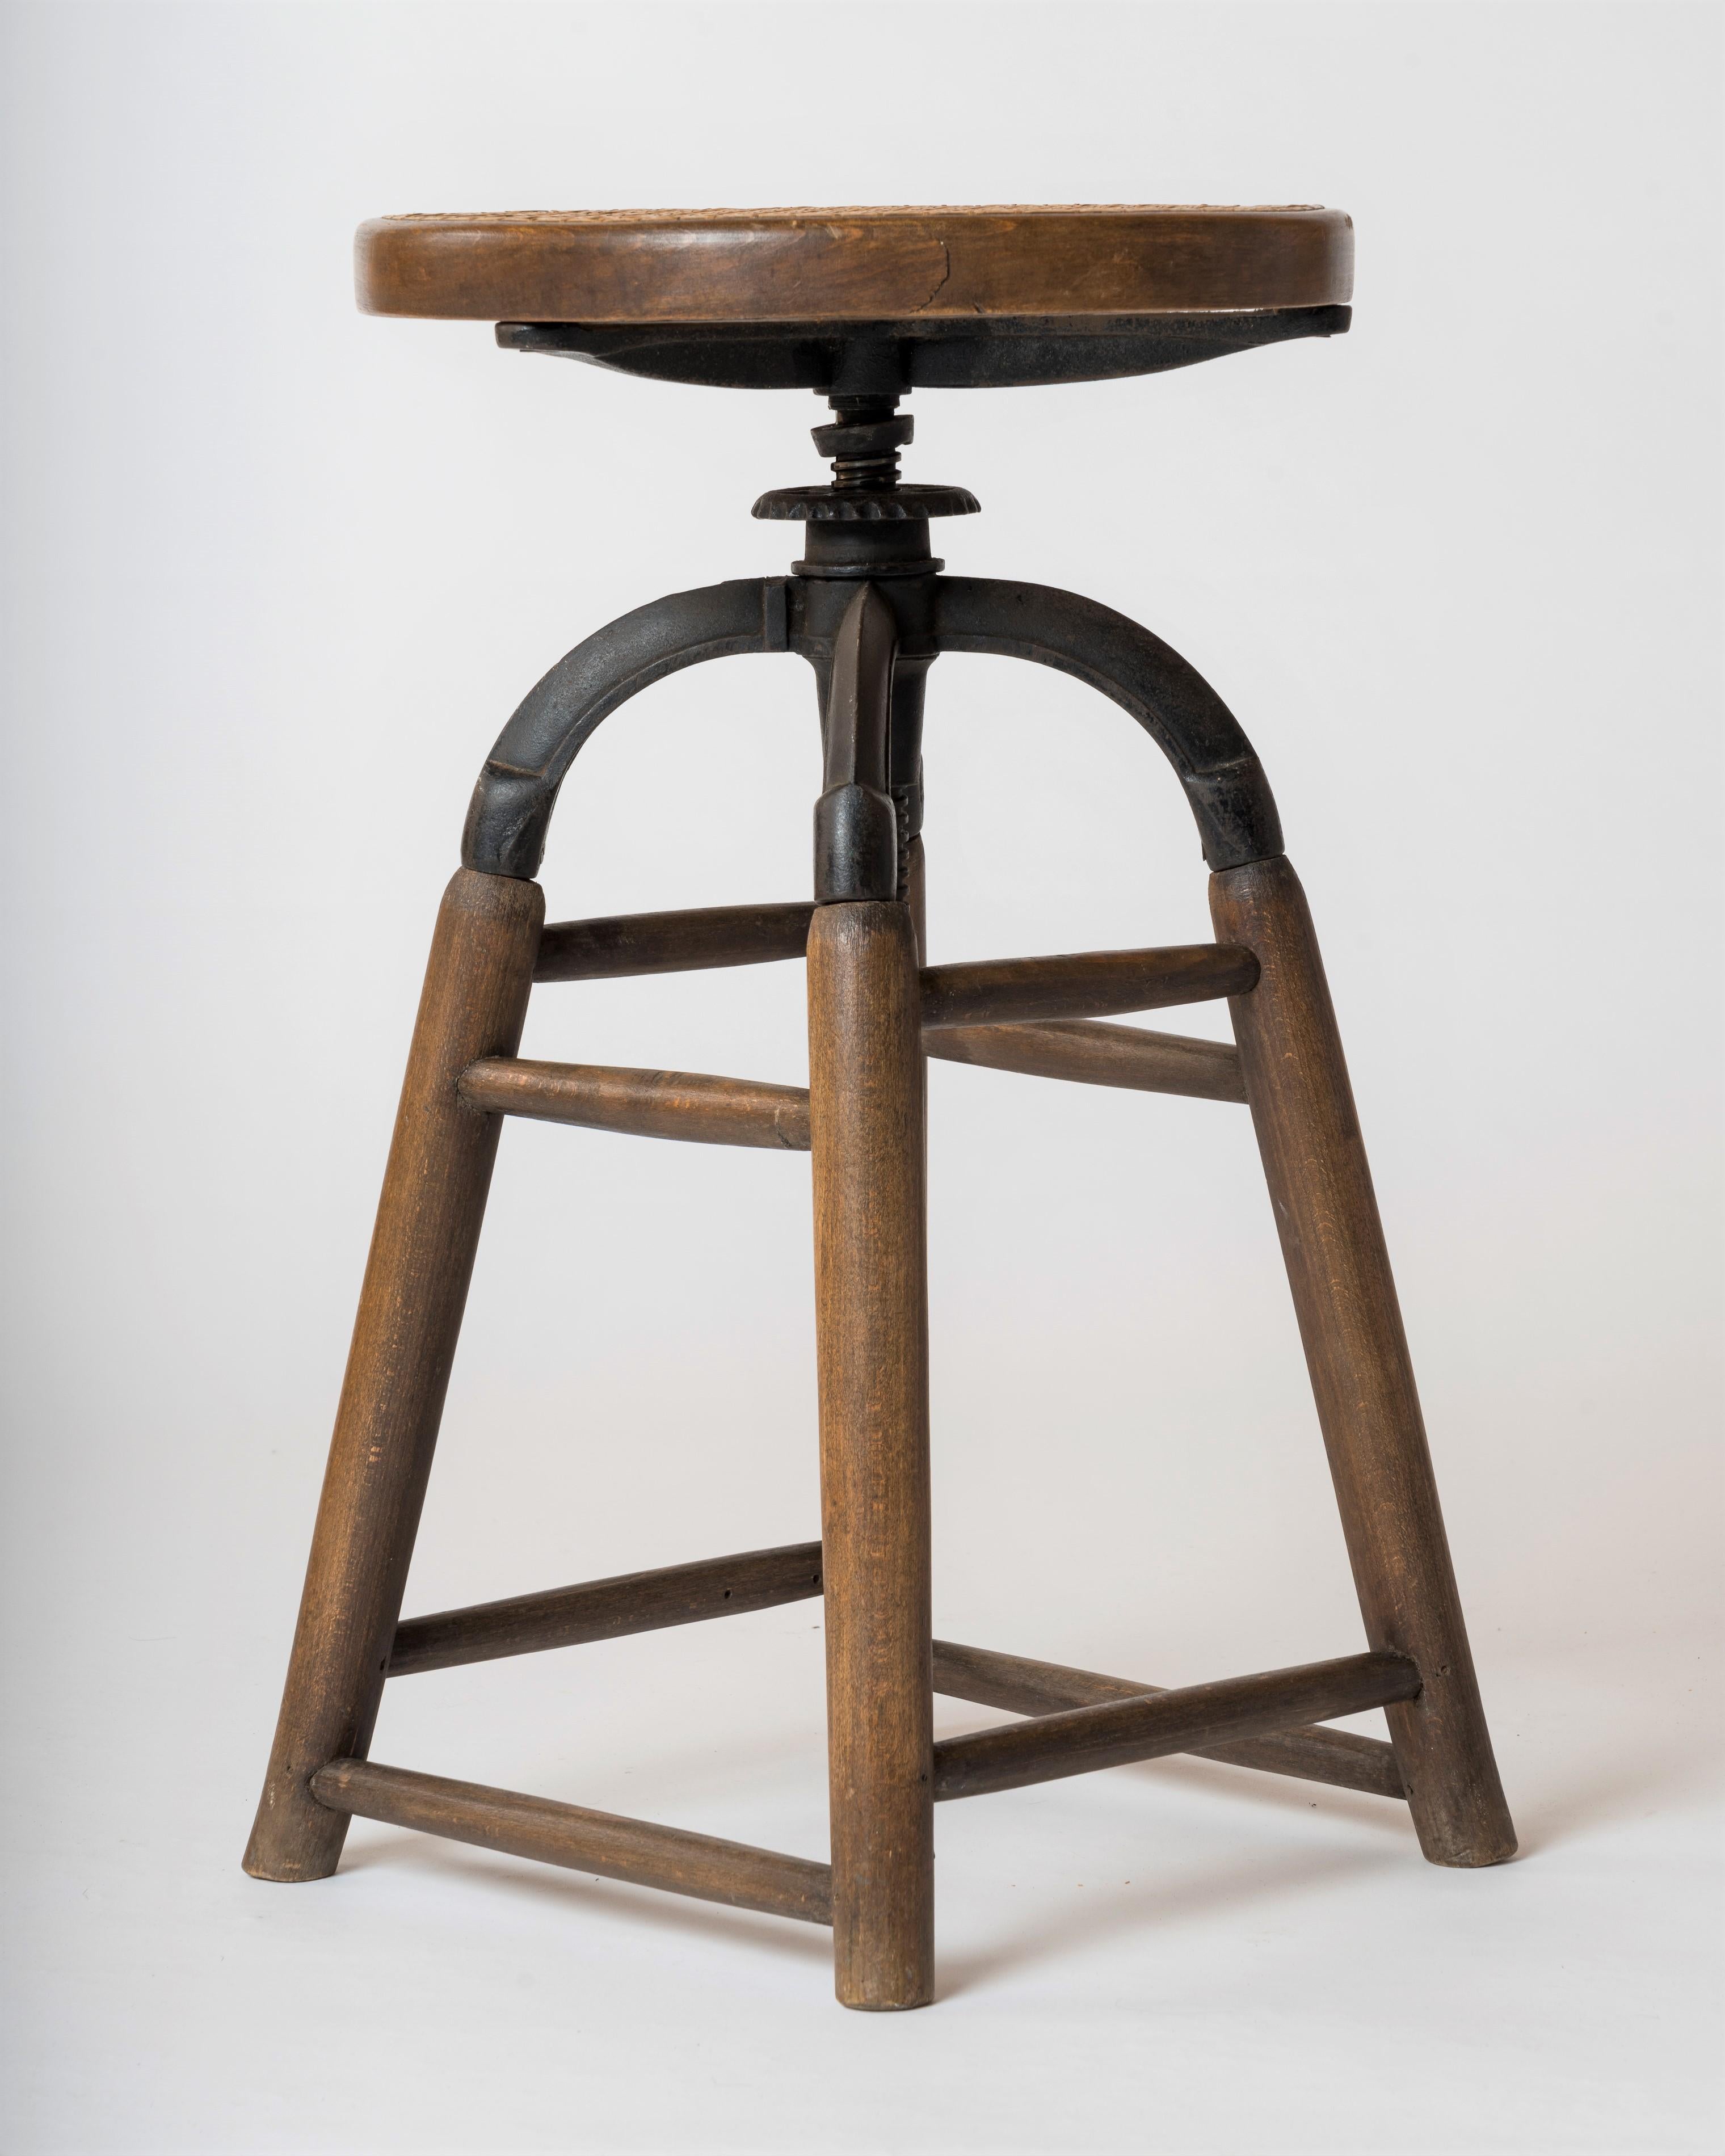 Signed elegant and sturdy four legged adjsutable stool by Thonet. The base structure is made of wooden legs inserted into a cast iron structure. The seat itself can be adjusted for heitgh thanks to a screw mecanism. 
Minimum height is 58cm.
In